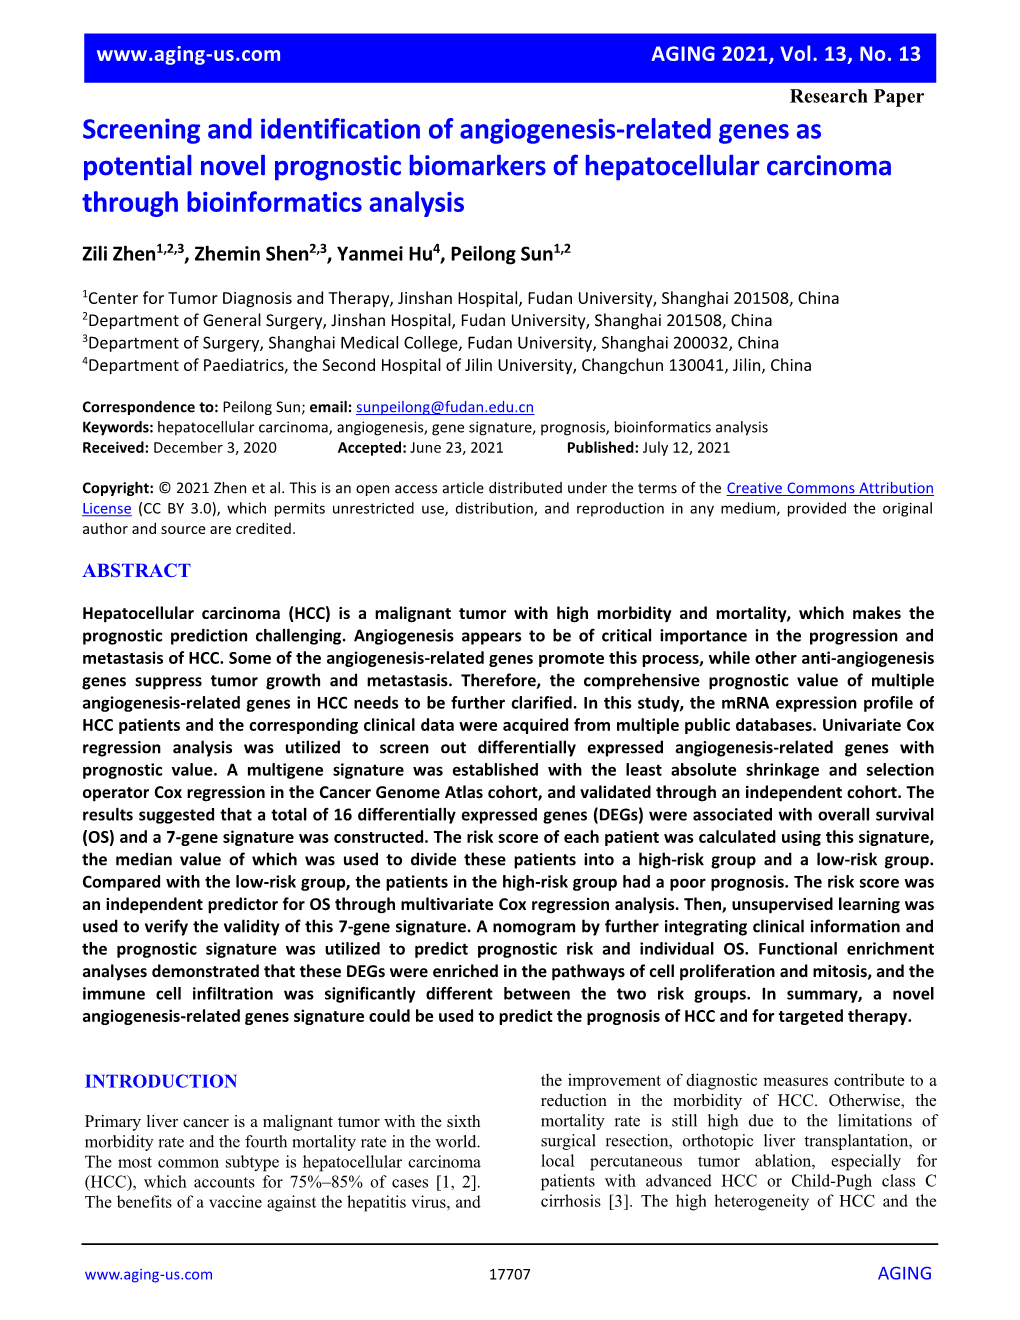 Screening and Identification of Angiogenesis-Related Genes As Potential Novel Prognostic Biomarkers of Hepatocellular Carcinoma Through Bioinformatics Analysis